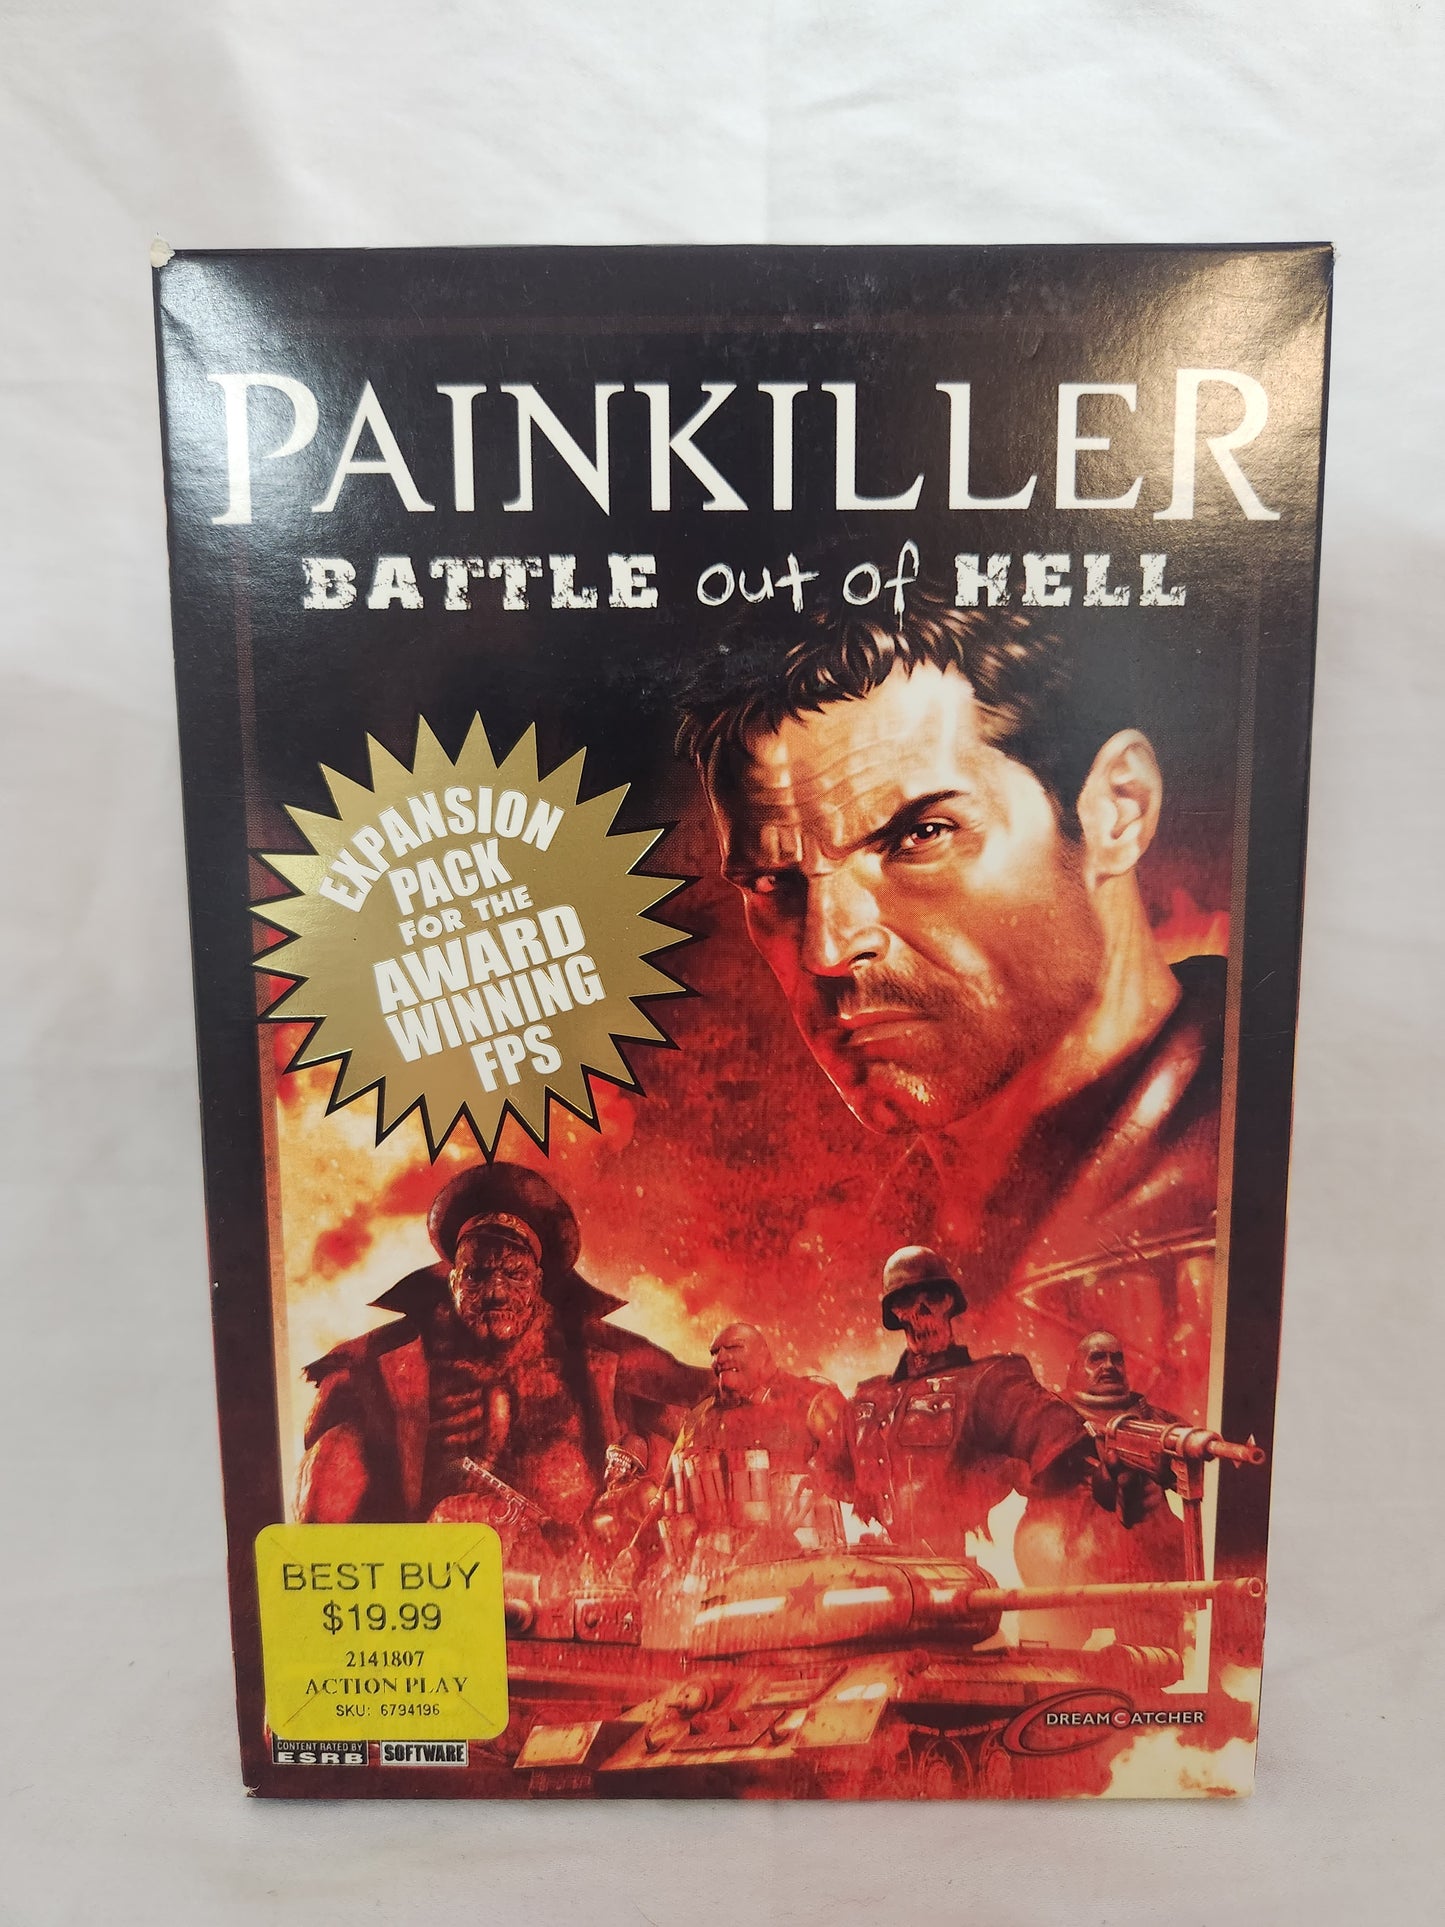 Painkiller: Battle out of Hell expansion pack PC Game (need base game to play)